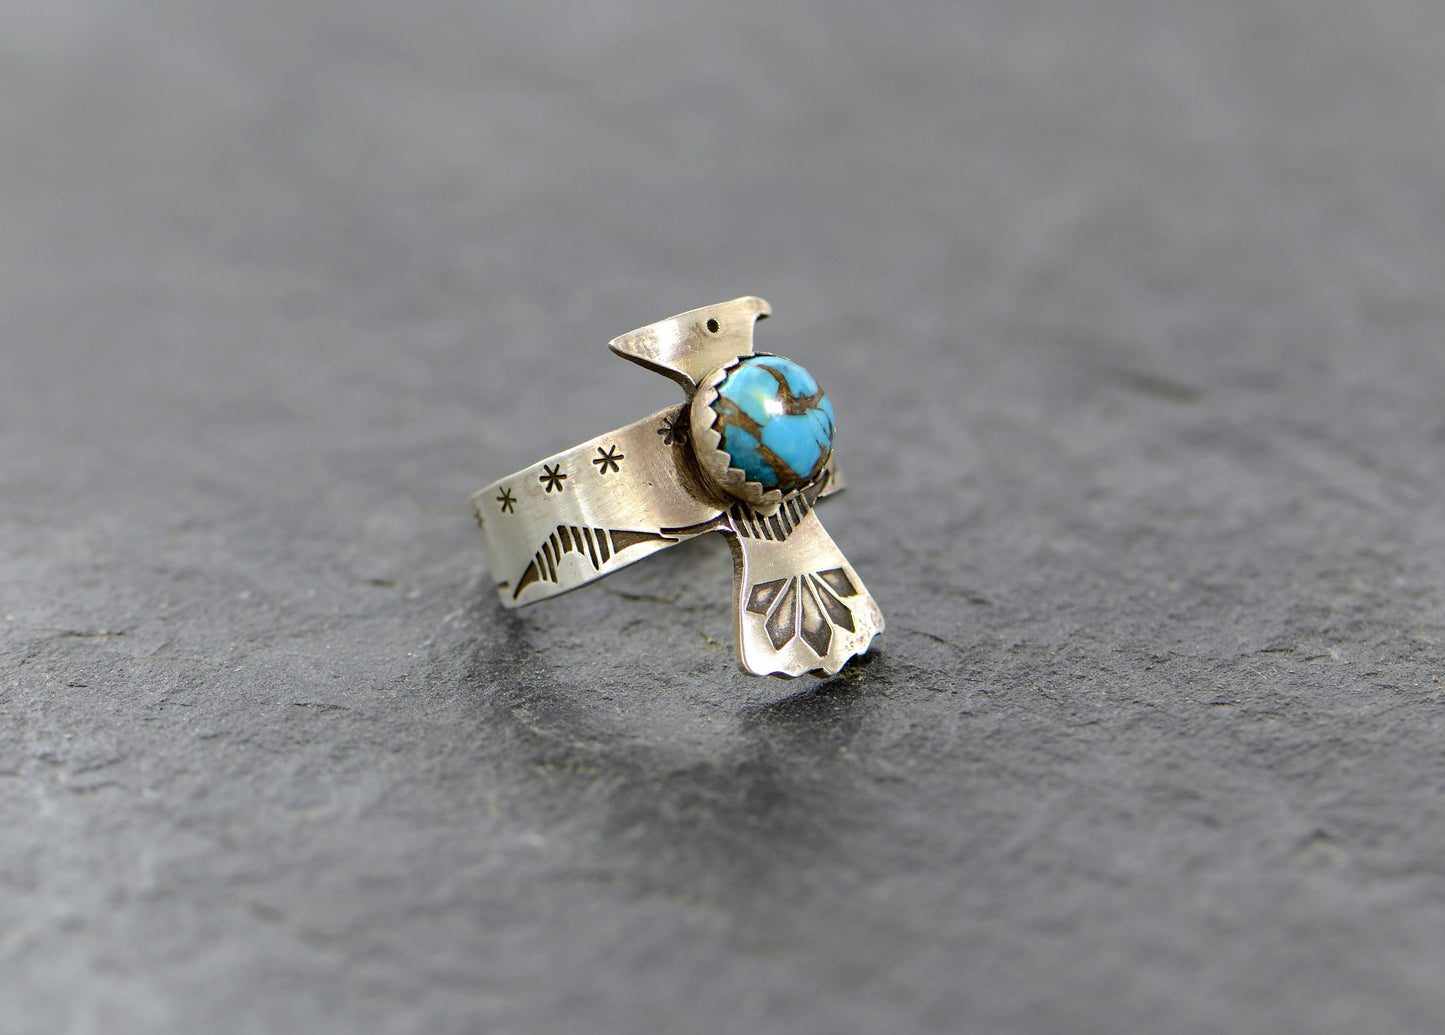 Thunderbird ring in sterling silver with turquoise